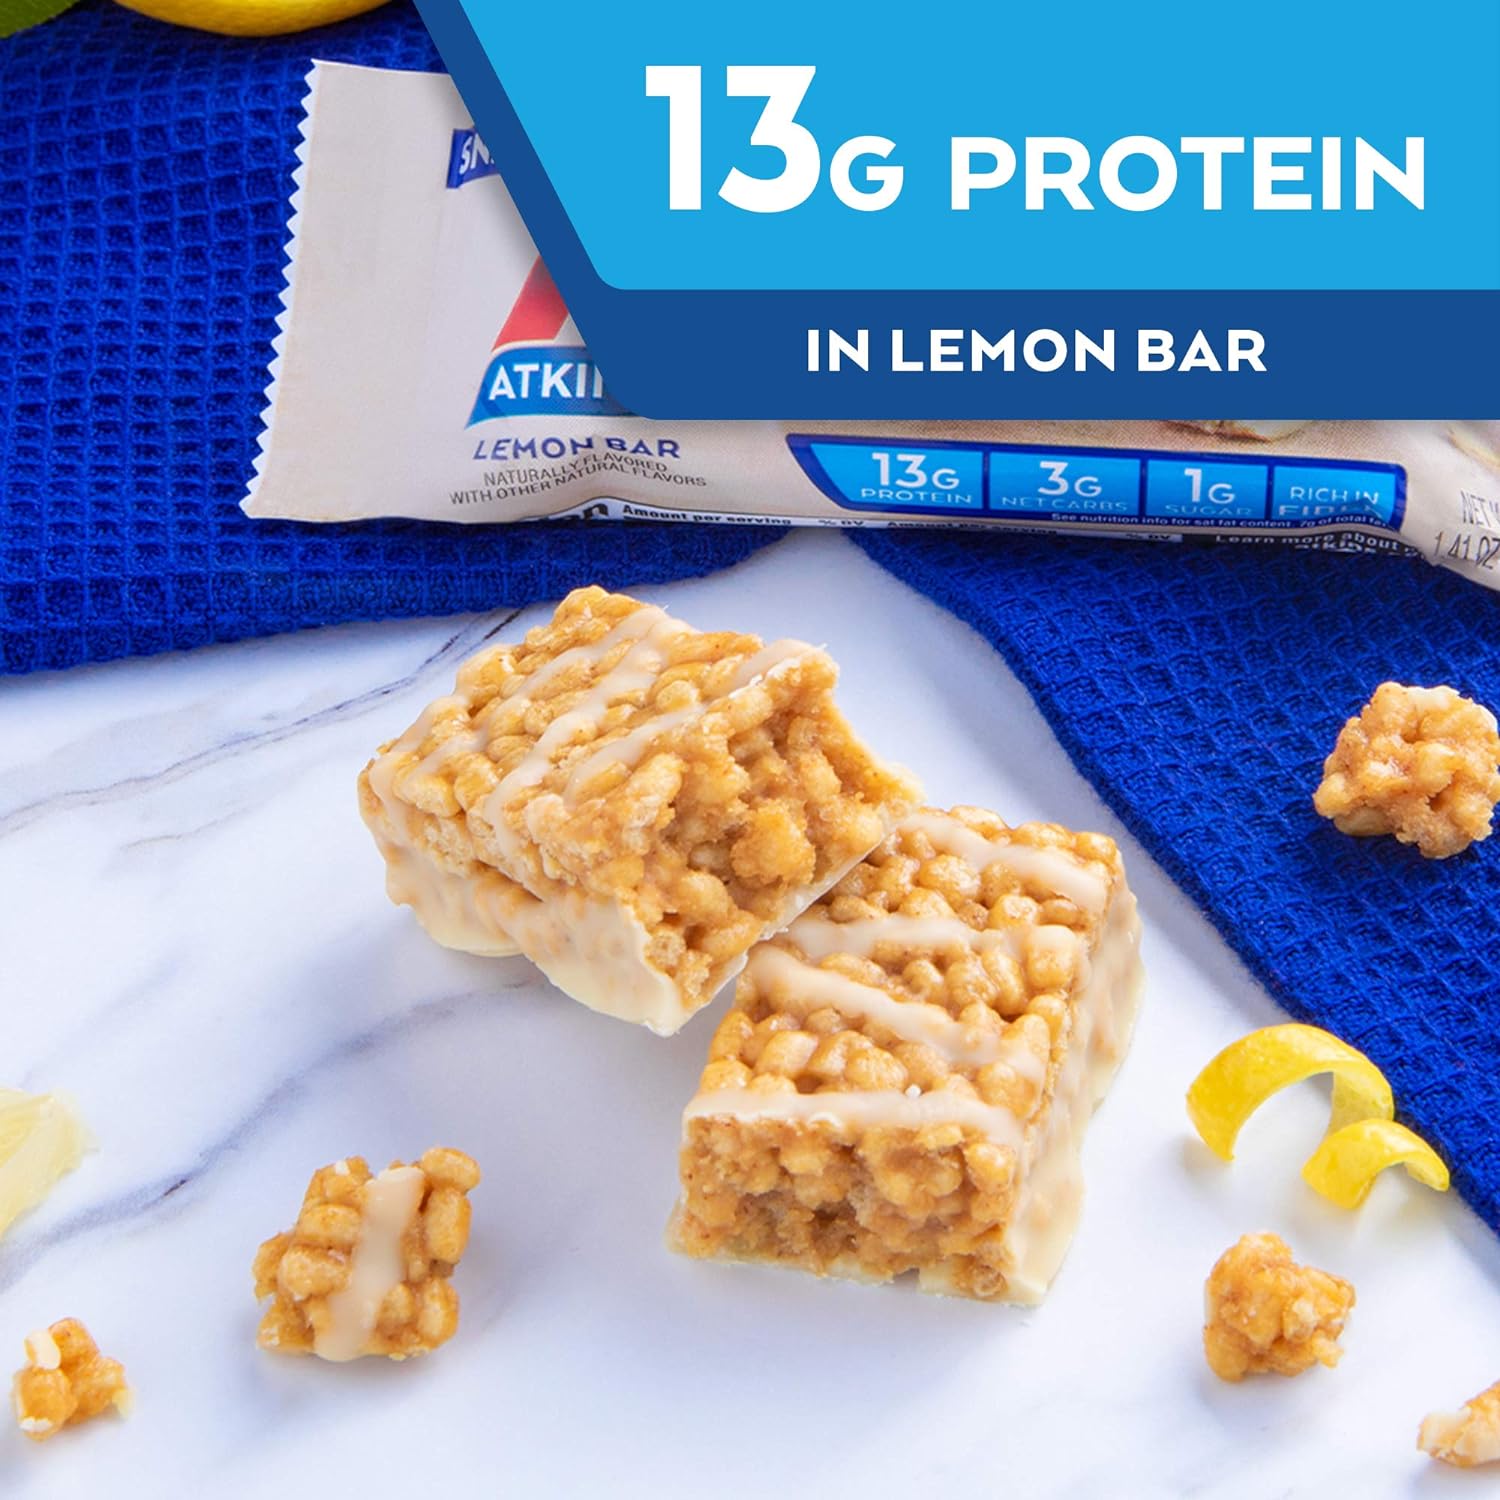  Atkins Lemon Snack Bar, Made with Real Almond Butter, 1g Su